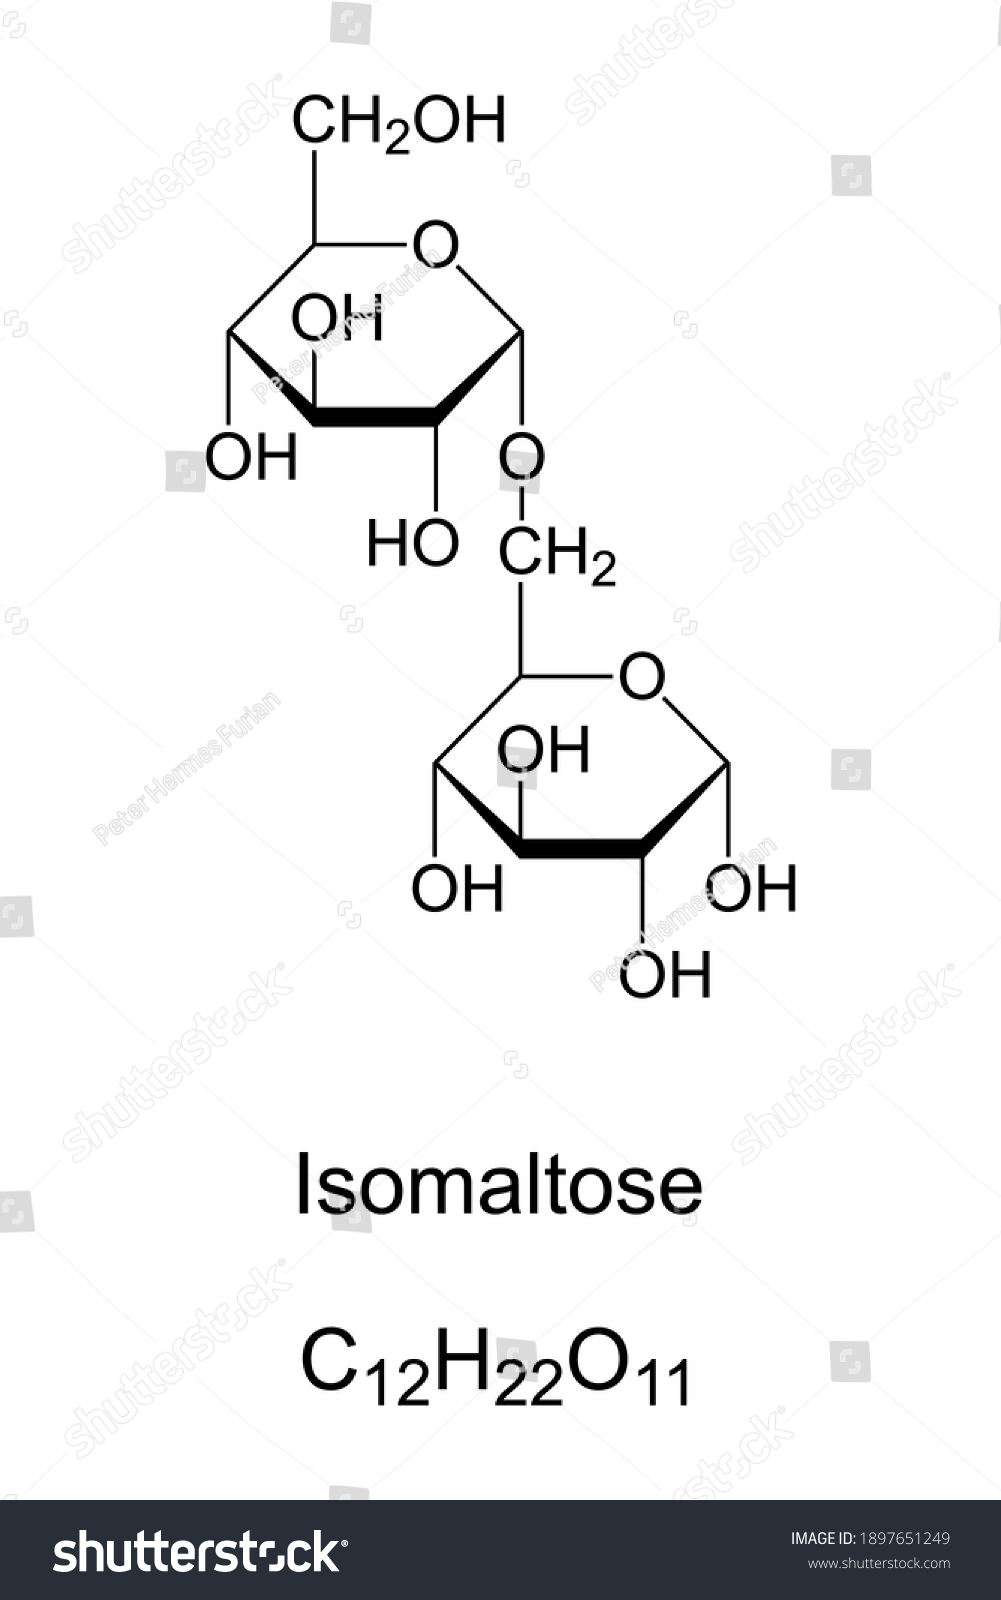 SVG of Isomaltose, chemical structure. Disaccharide, similar to maltose, a pyranose and reducing sugar. Product of caramelization of glucose. Skeletal and structural formula. Illustration over white. Vector. svg